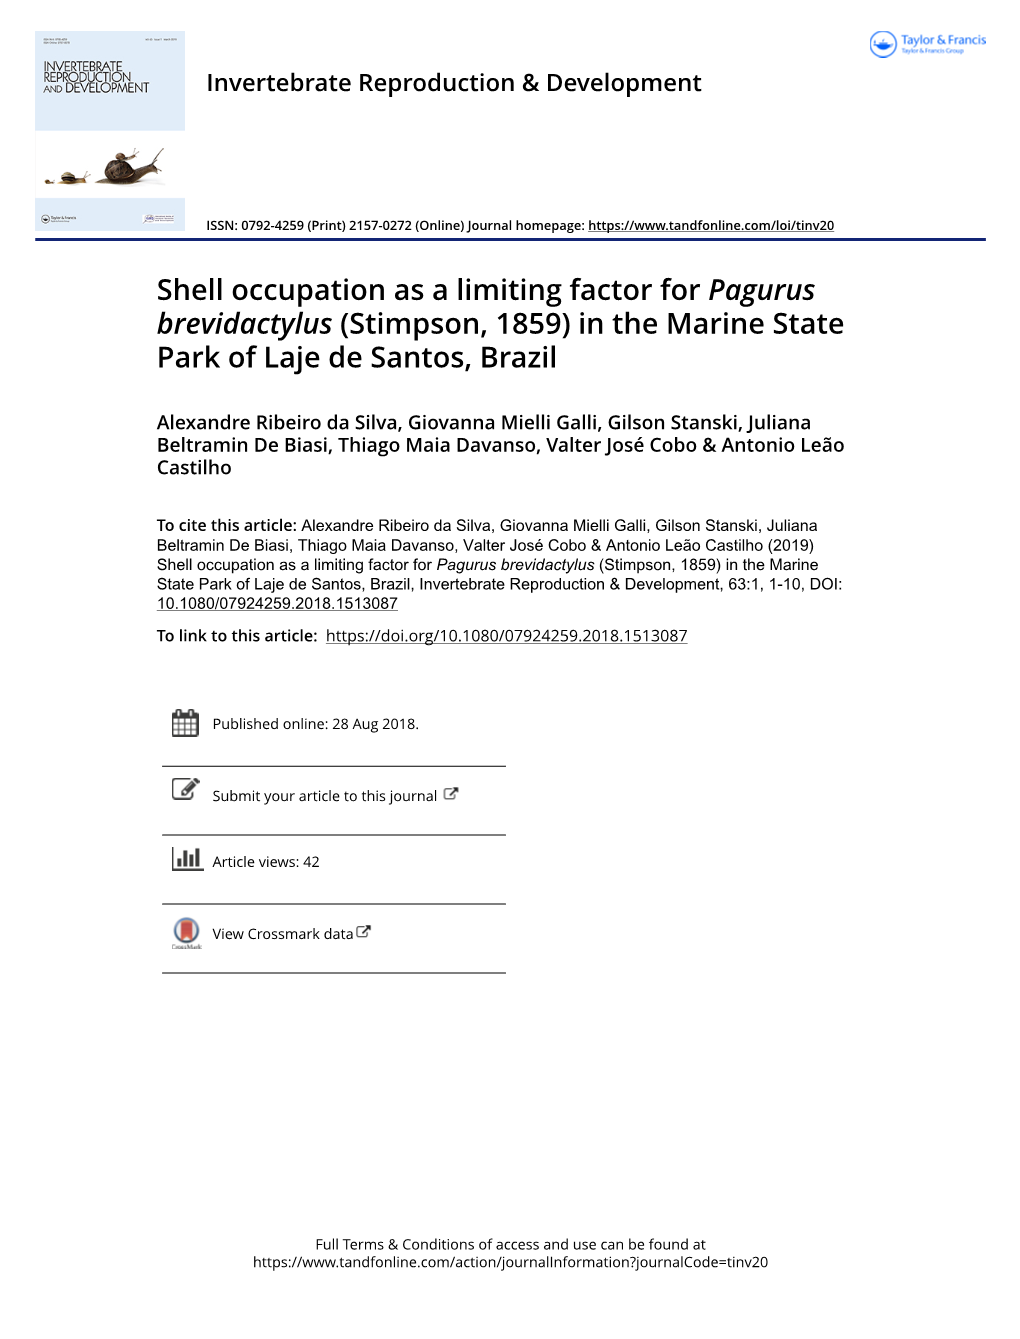 Shell Occupation As a Limiting Factor for Pagurus Brevidactylus (Stimpson, 1859) in the Marine State Park of Laje De Santos, Brazil